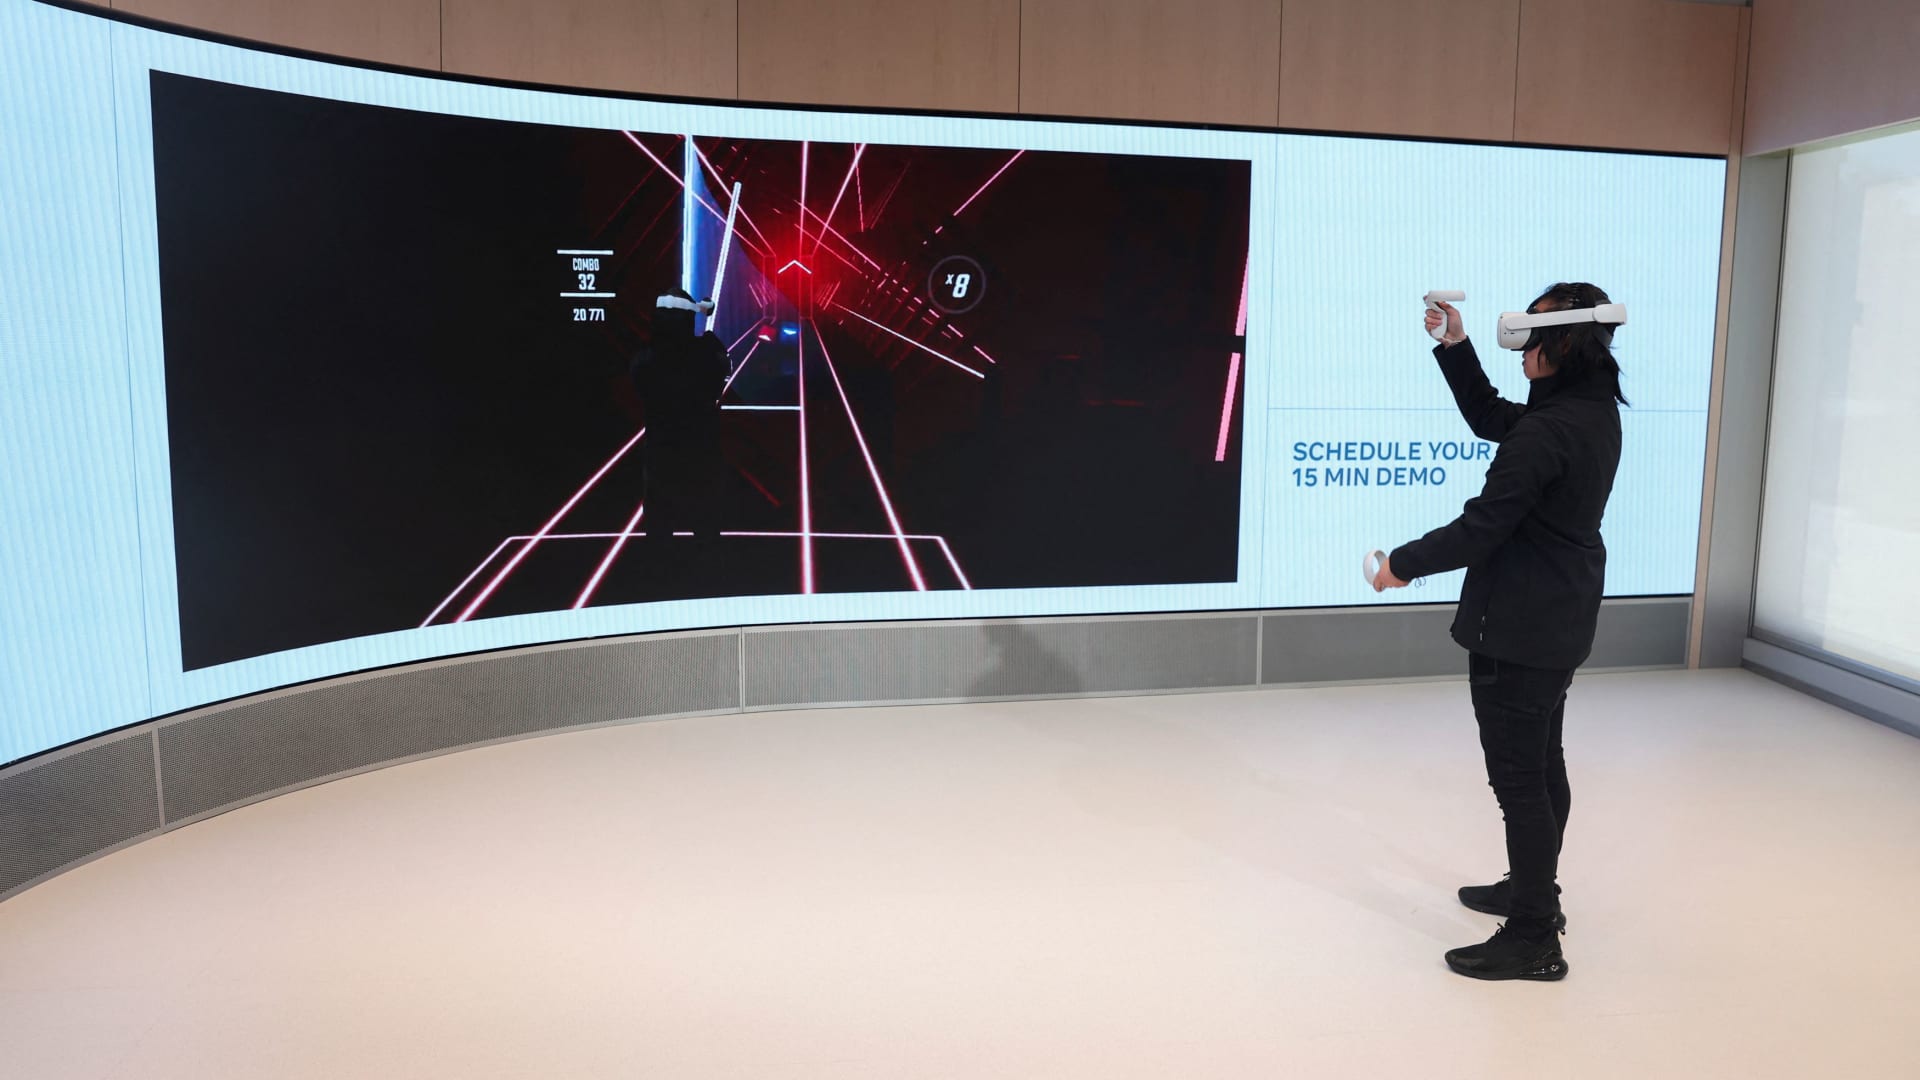 Chris Nguyen, an experience expert, demonstrates the Quest Experience during a preview of the inaugural physical store of Facebook-owner Meta Platforms Inc in Burlingame, California, May 4, 2022.